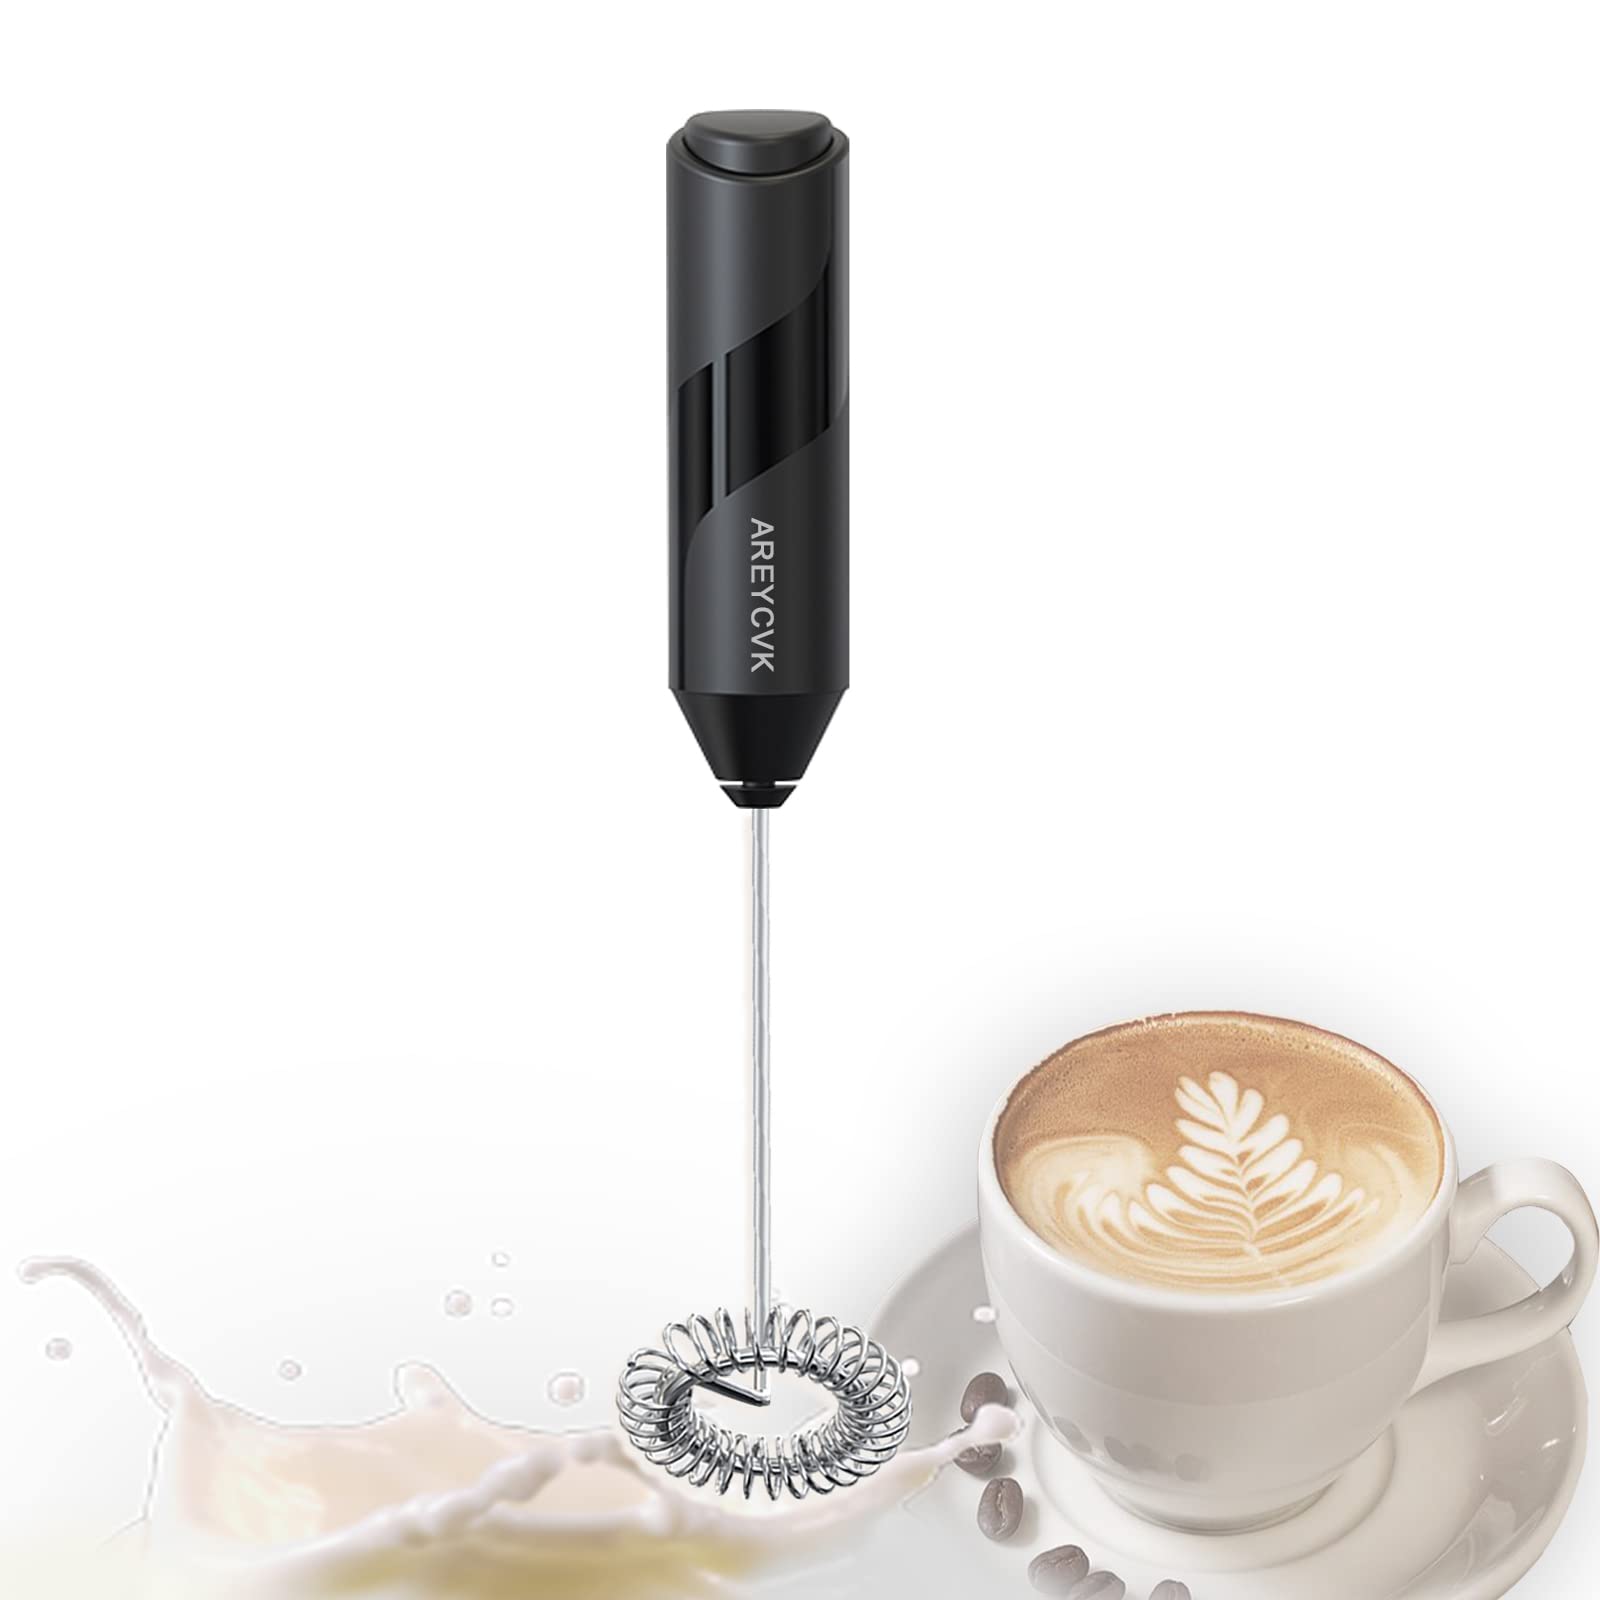 AREYCVK Handheld milk frother Small mixer for drinks Whisk Frother of Battery Operated,Stainless Steel Frother forlatte,cappuccino,hot ,chocolate, Matcha(BLCAK)